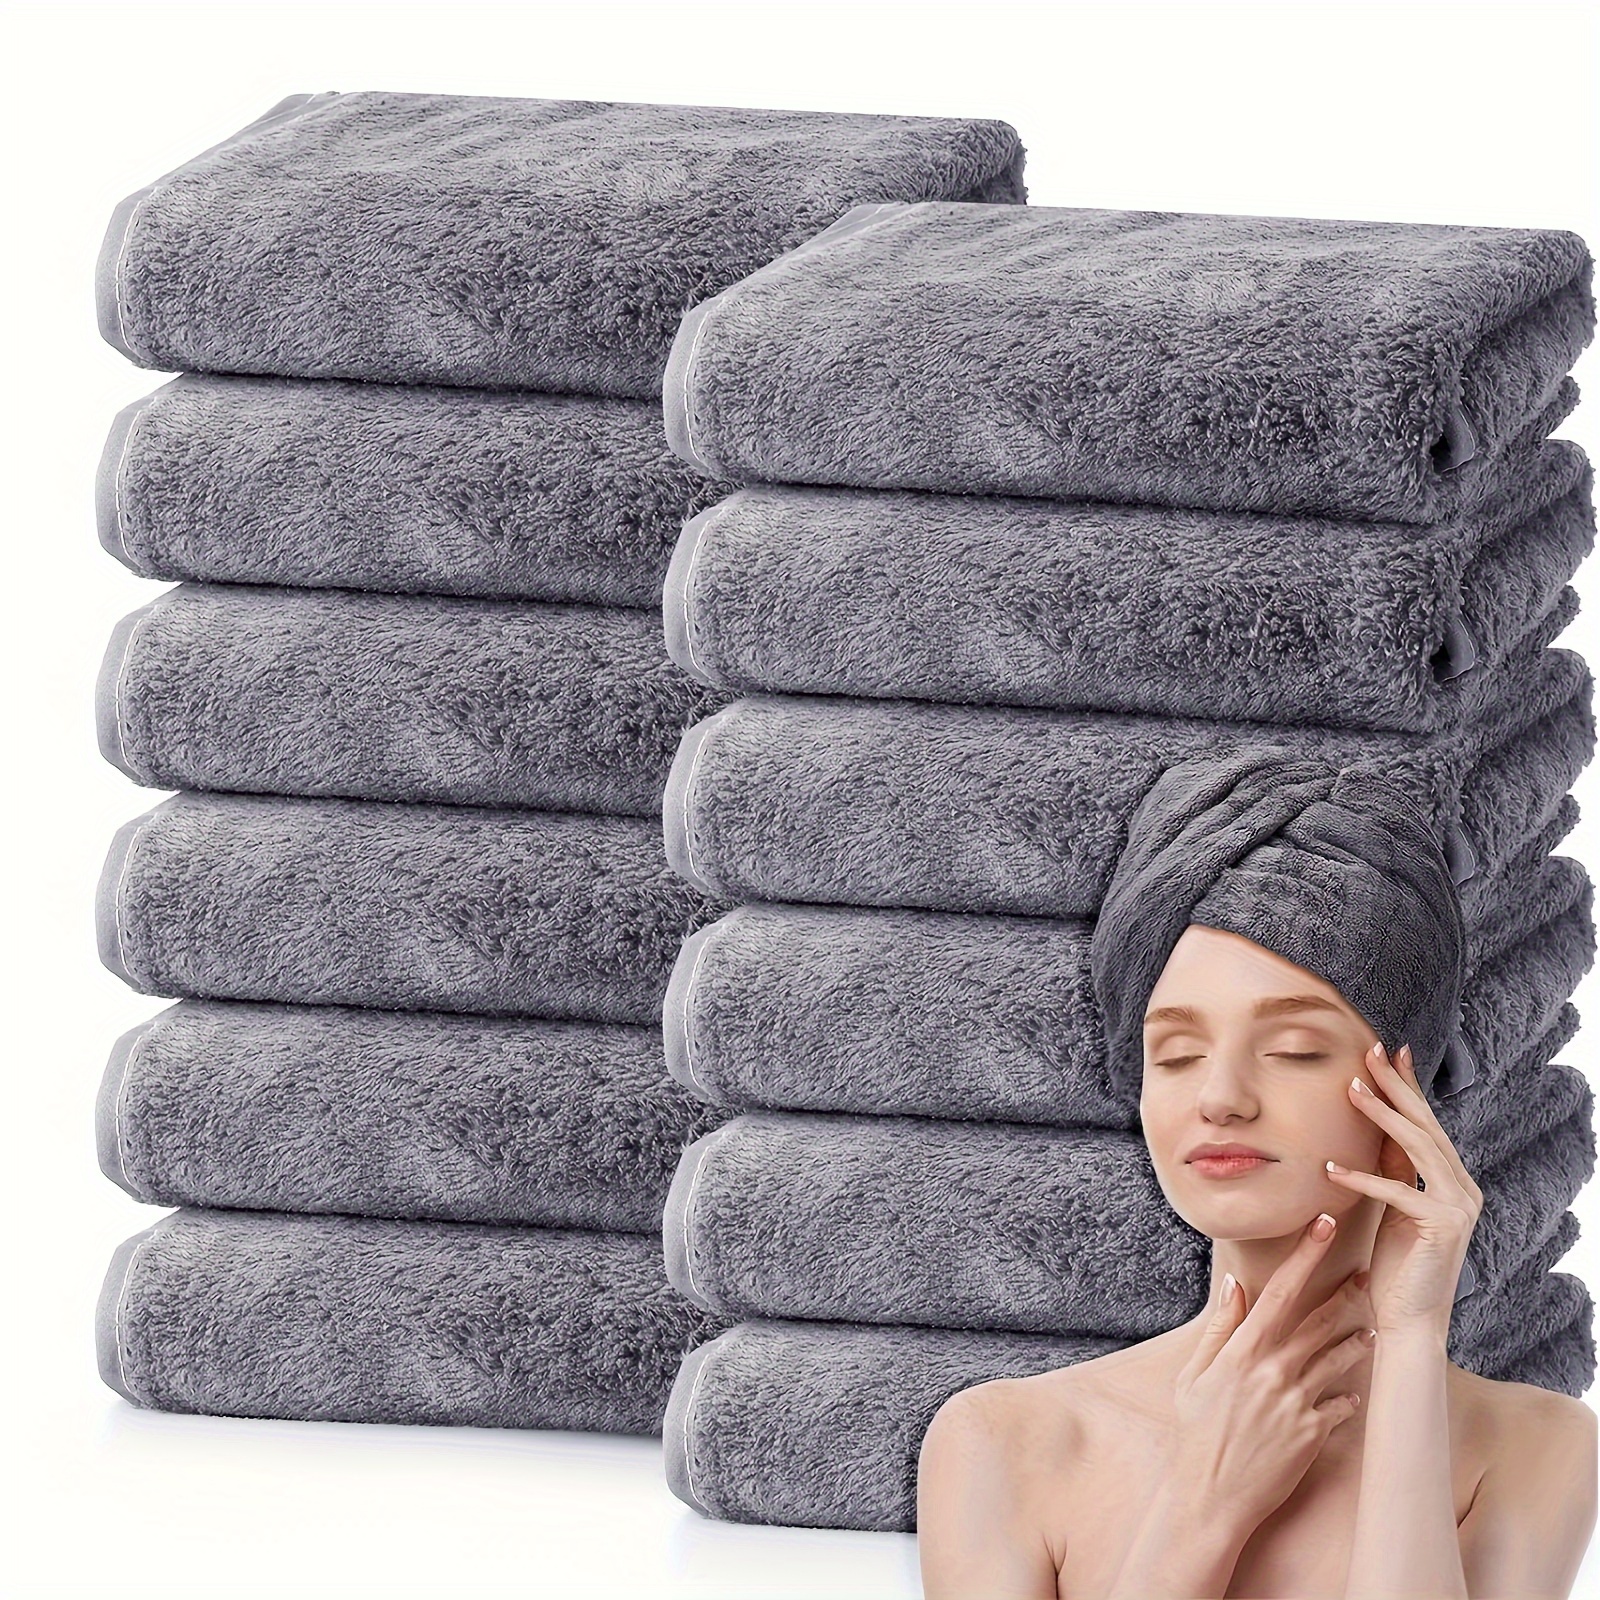 

6pcs Soft Microfiber Hand Towel Set, Absorbent Lightweight Face Towel, Quick Dry And Durable Hand Towel, 13.7*29.5in